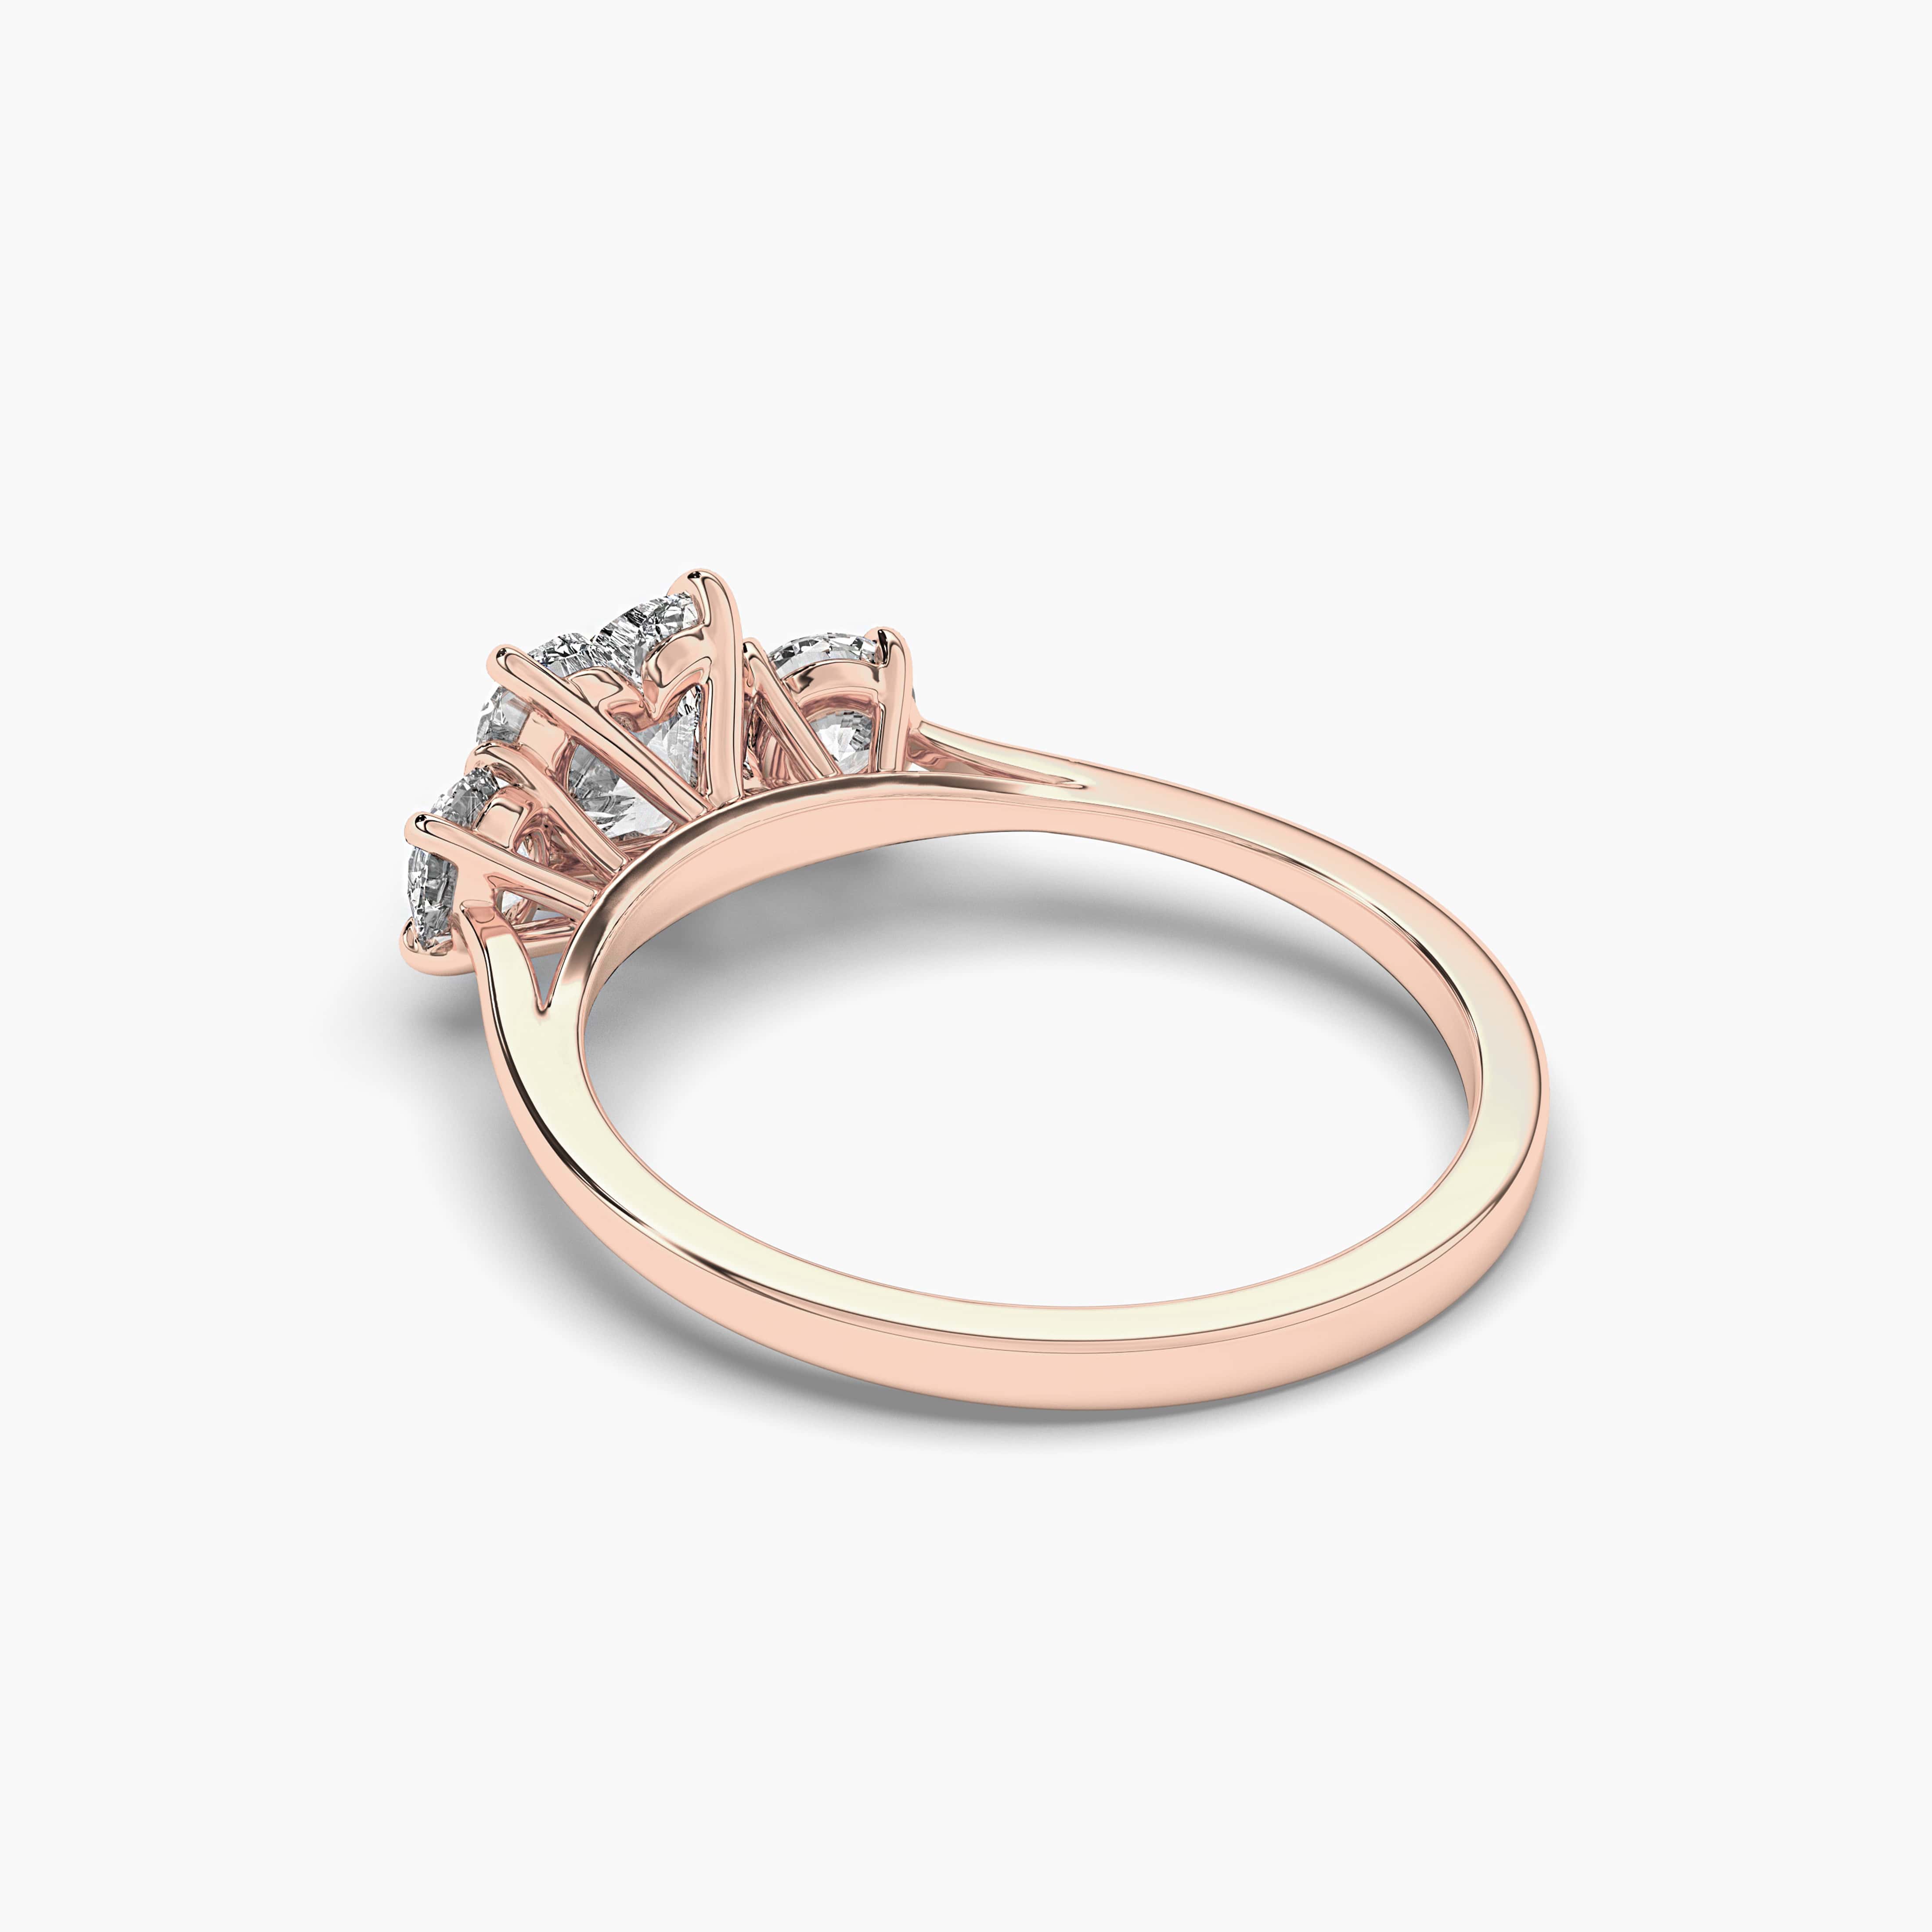 Rose Gold Heart Ring with 1.3 ct diamond